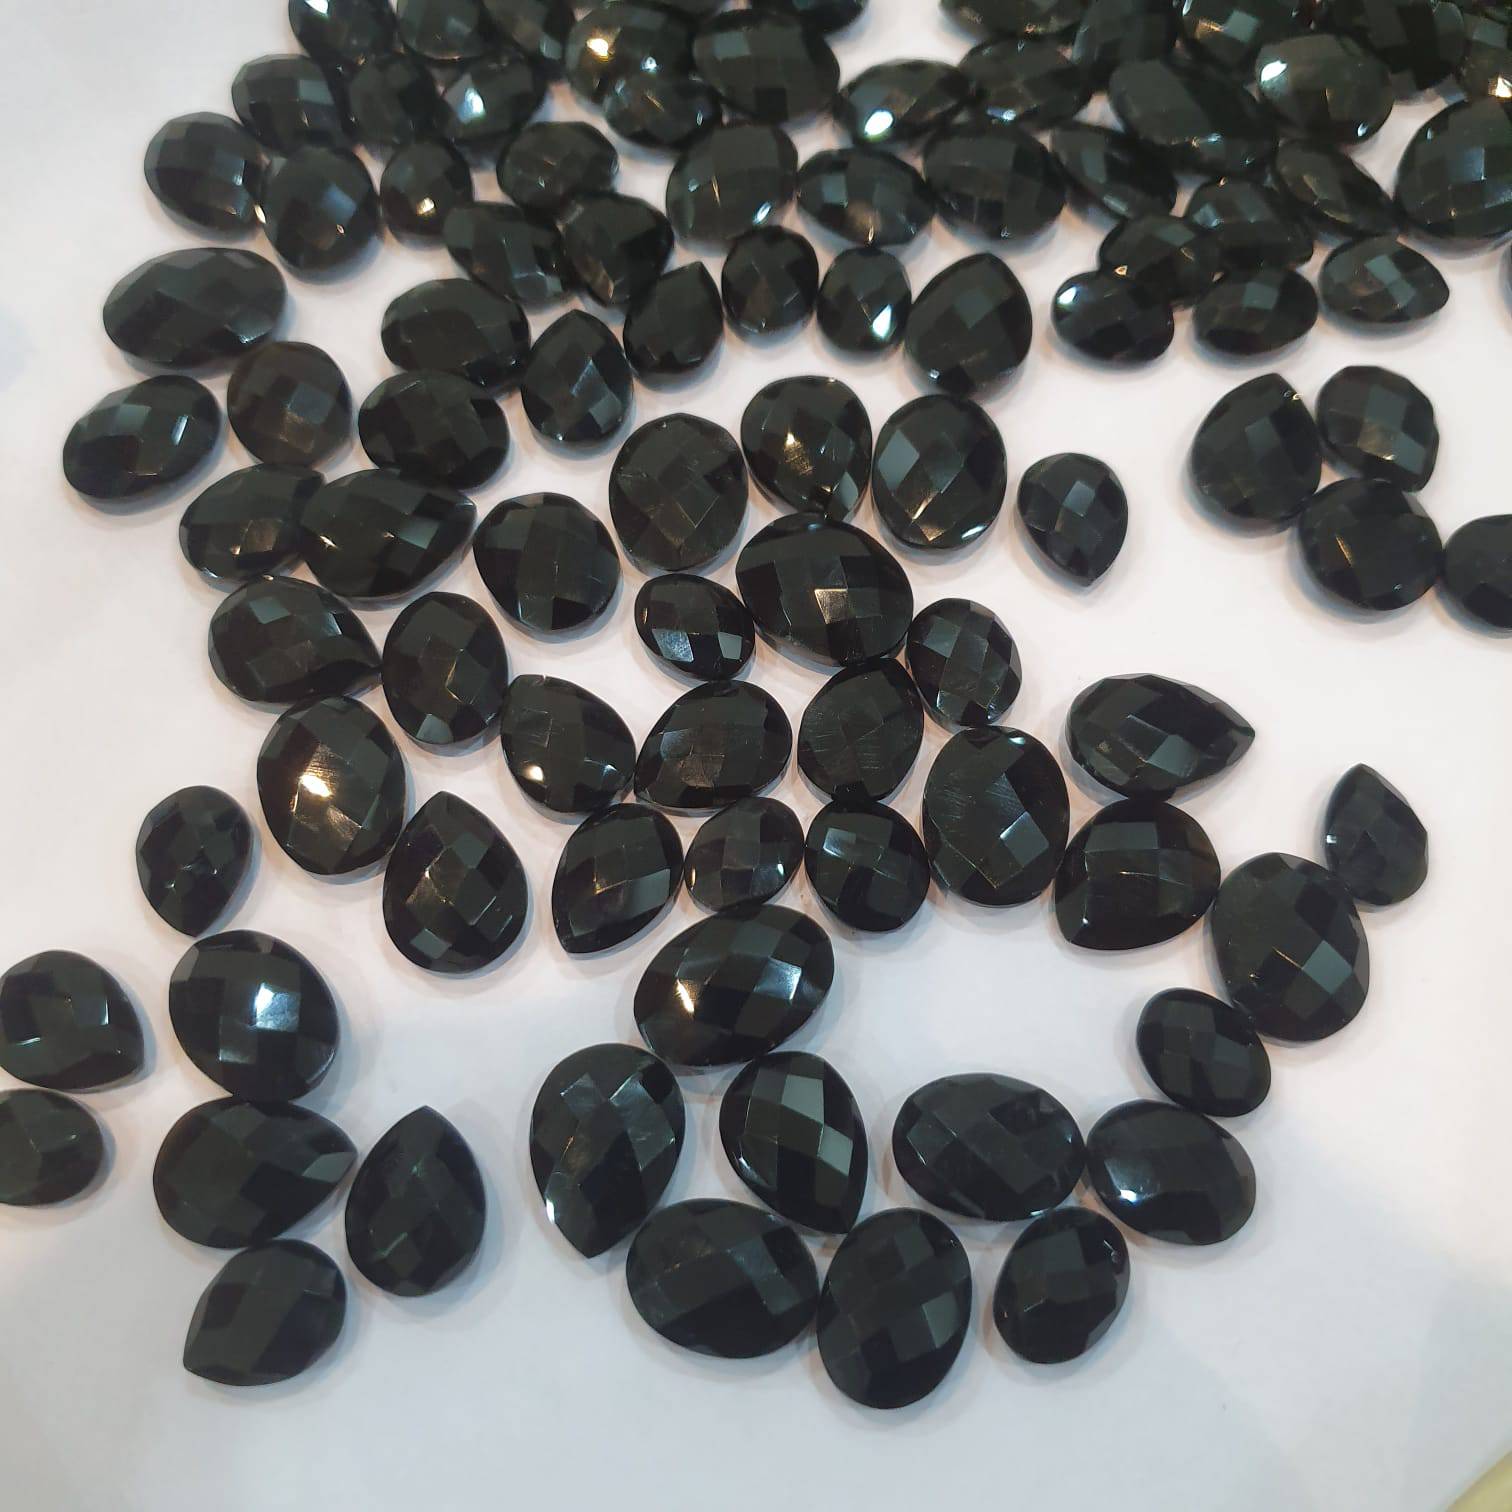 15pcs Natural Black Onyx Faceted Both side Ovals and Pears - The LabradoriteKing